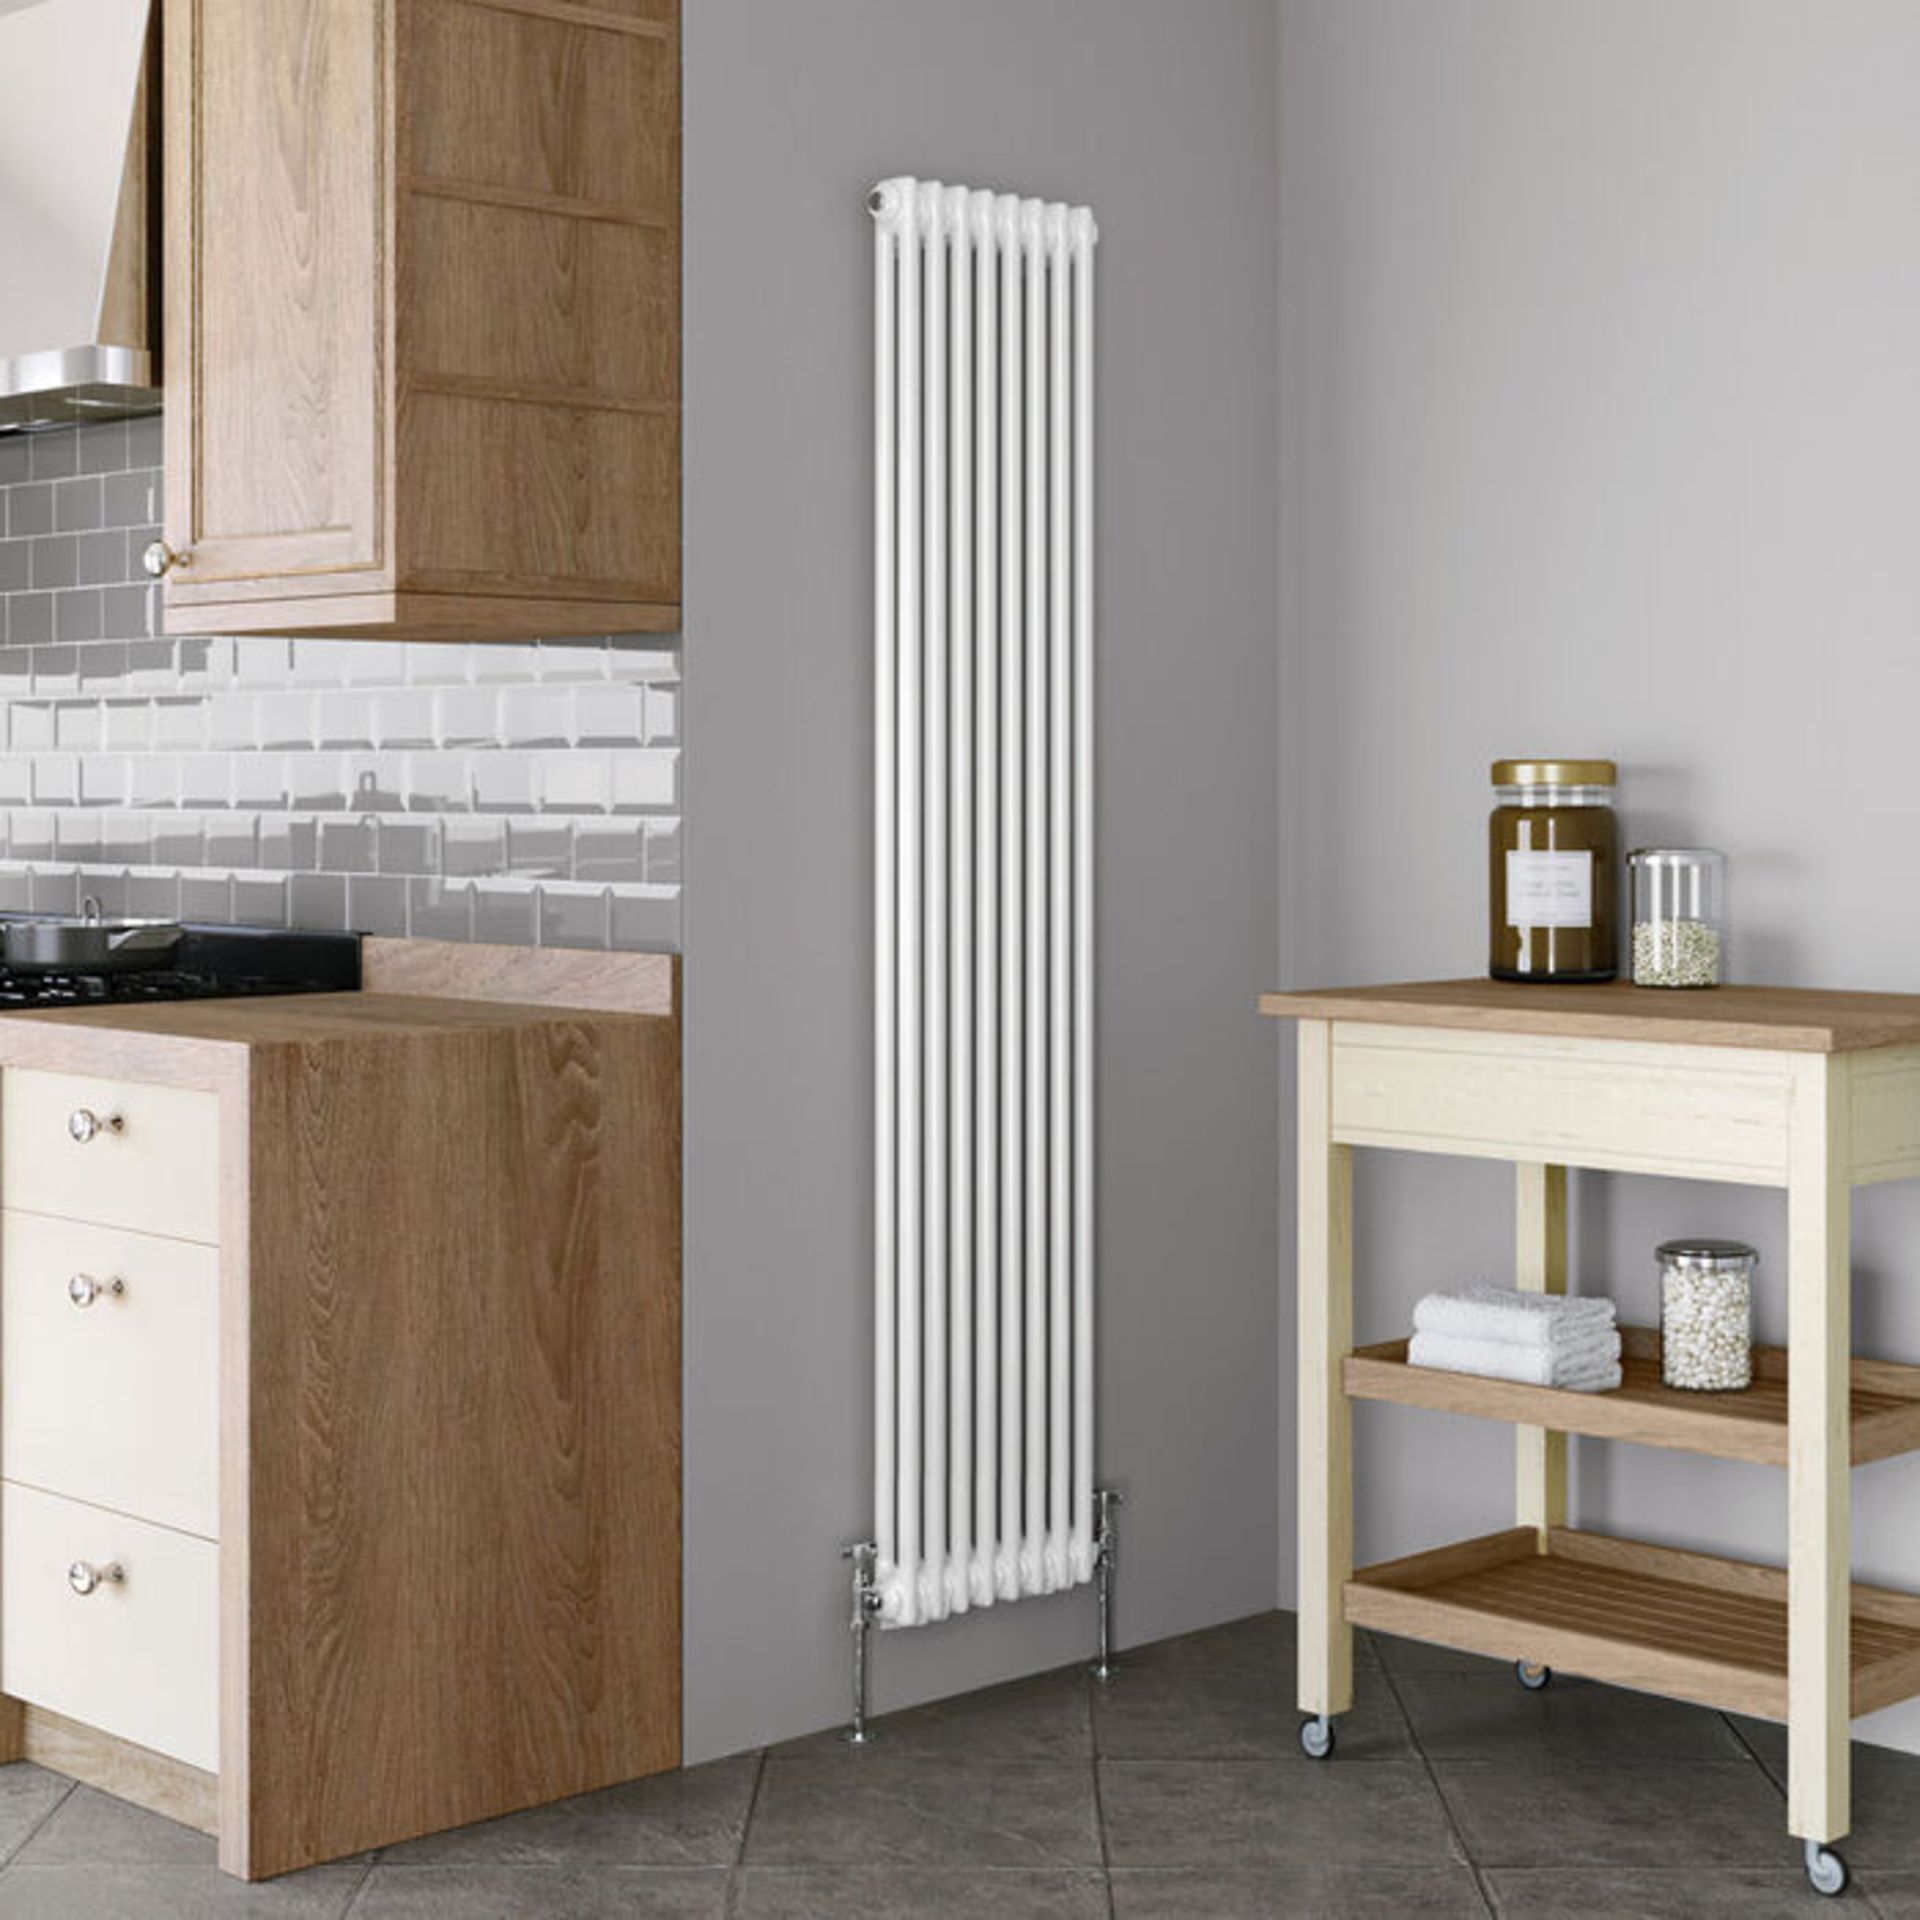 (DD112) 2000x350mm White Double Panel Vertical Colosseum Traditional Radiator. RRP £429.99. Fo...( - Image 4 of 4